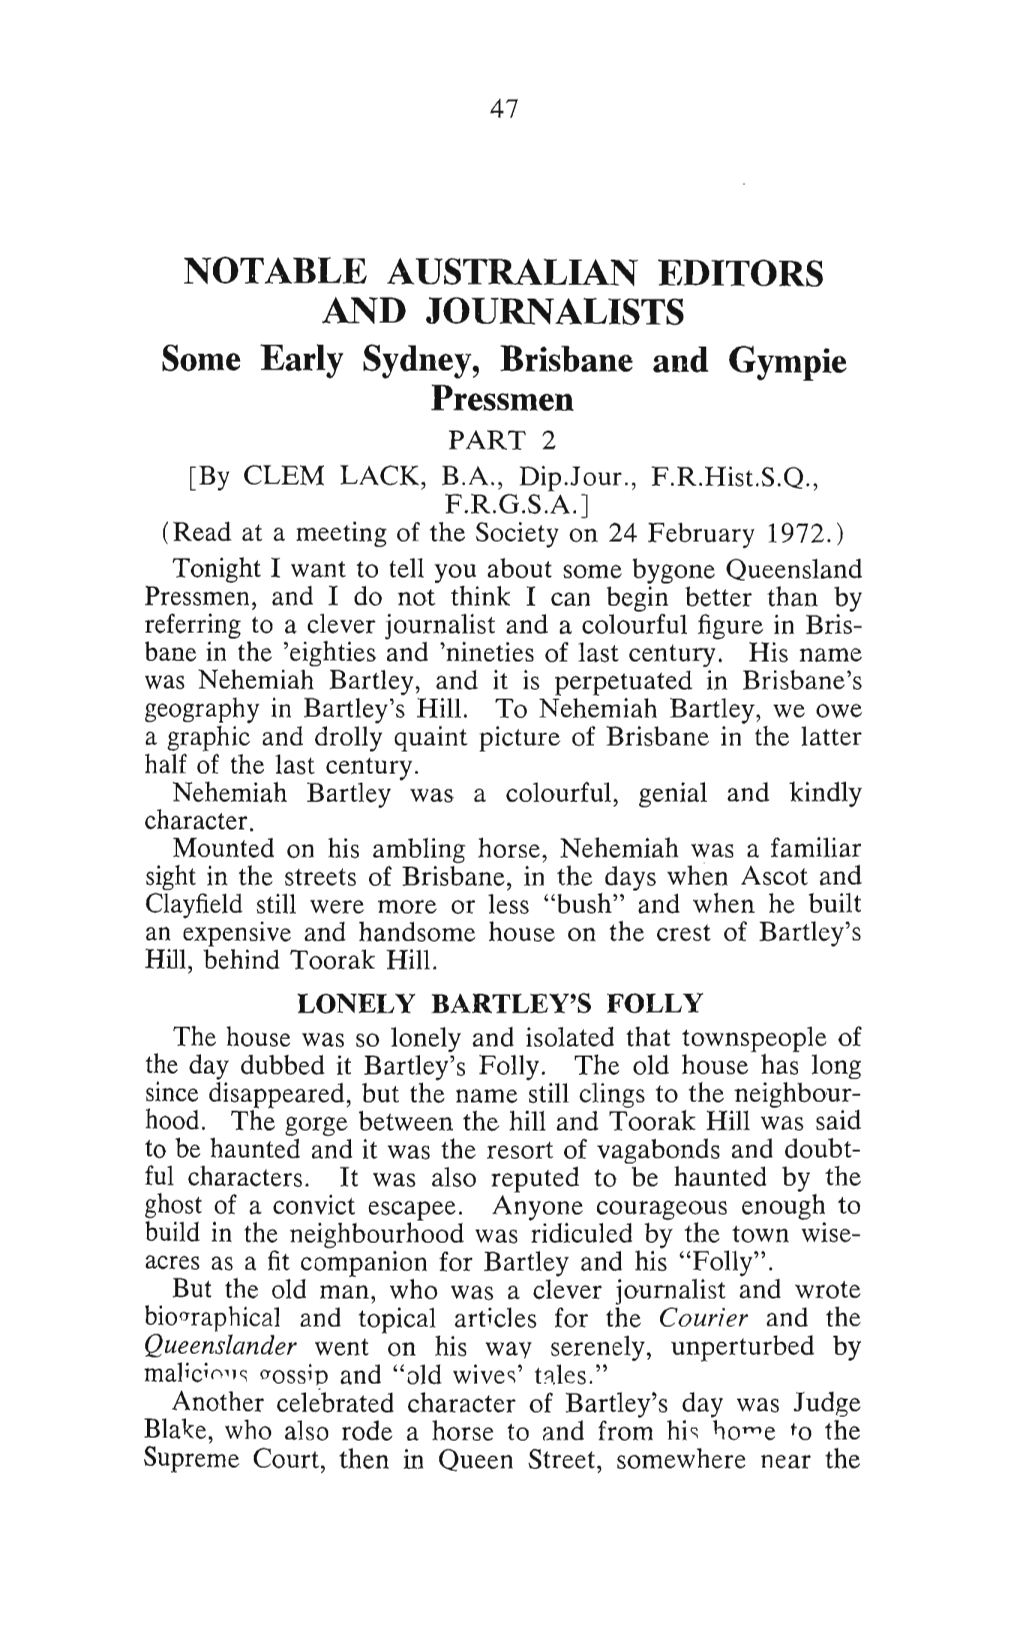 NOTABLE AUSTRALIAN EDITORS and JOURNALISTS Some Early Sydney, Brisbane and Gympie Pressmen